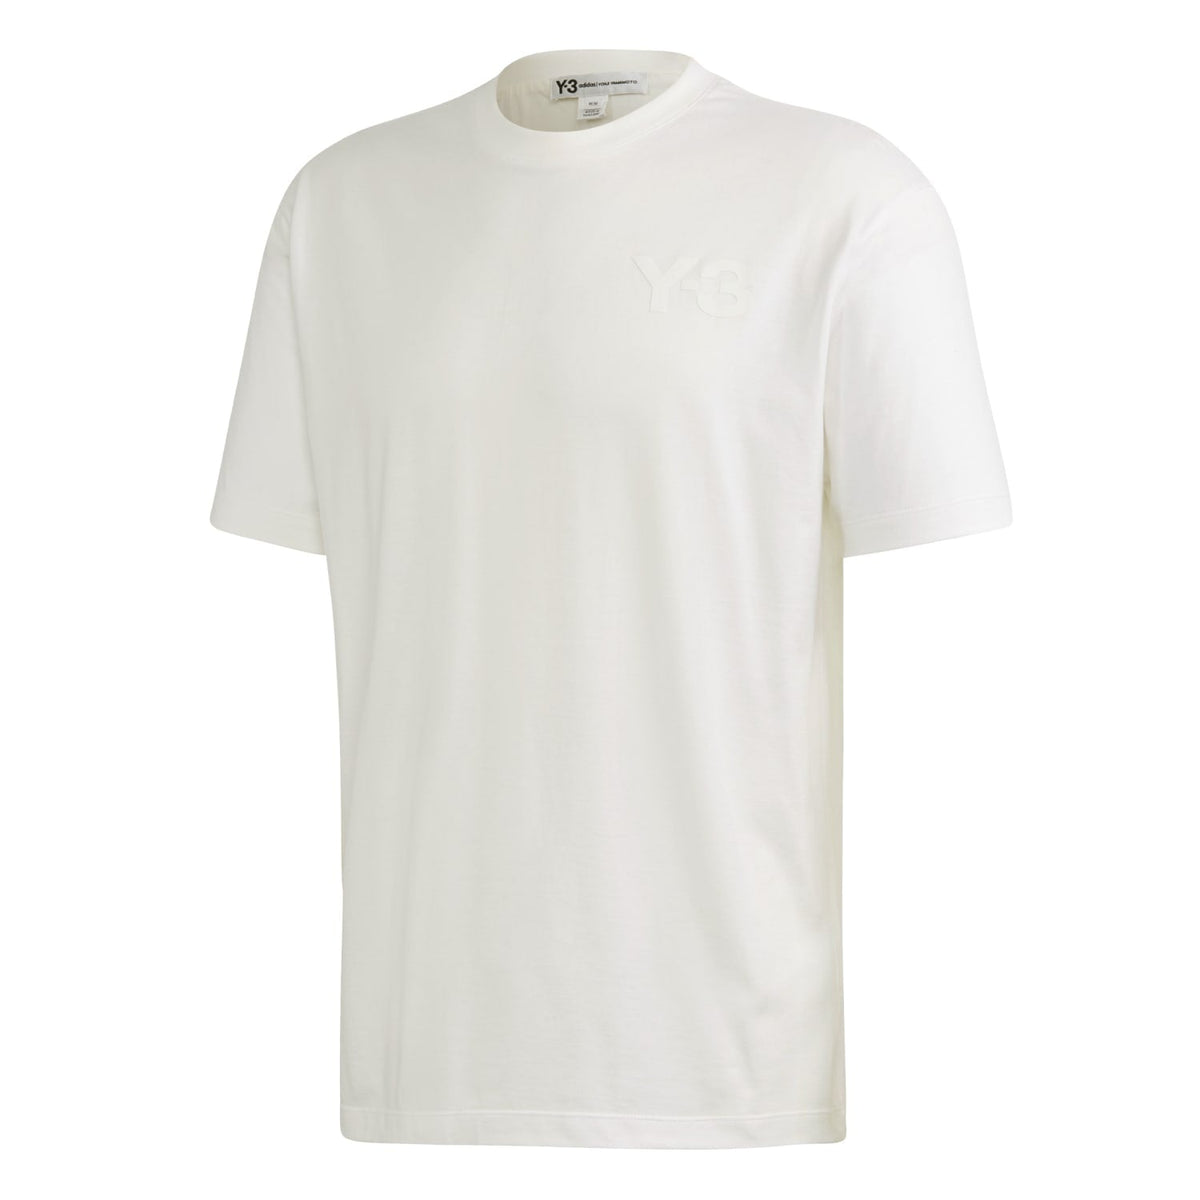 Adidas superstar Men Y - 3 CL SS Tee WHite FN3359 - T - SHIRTS Canada